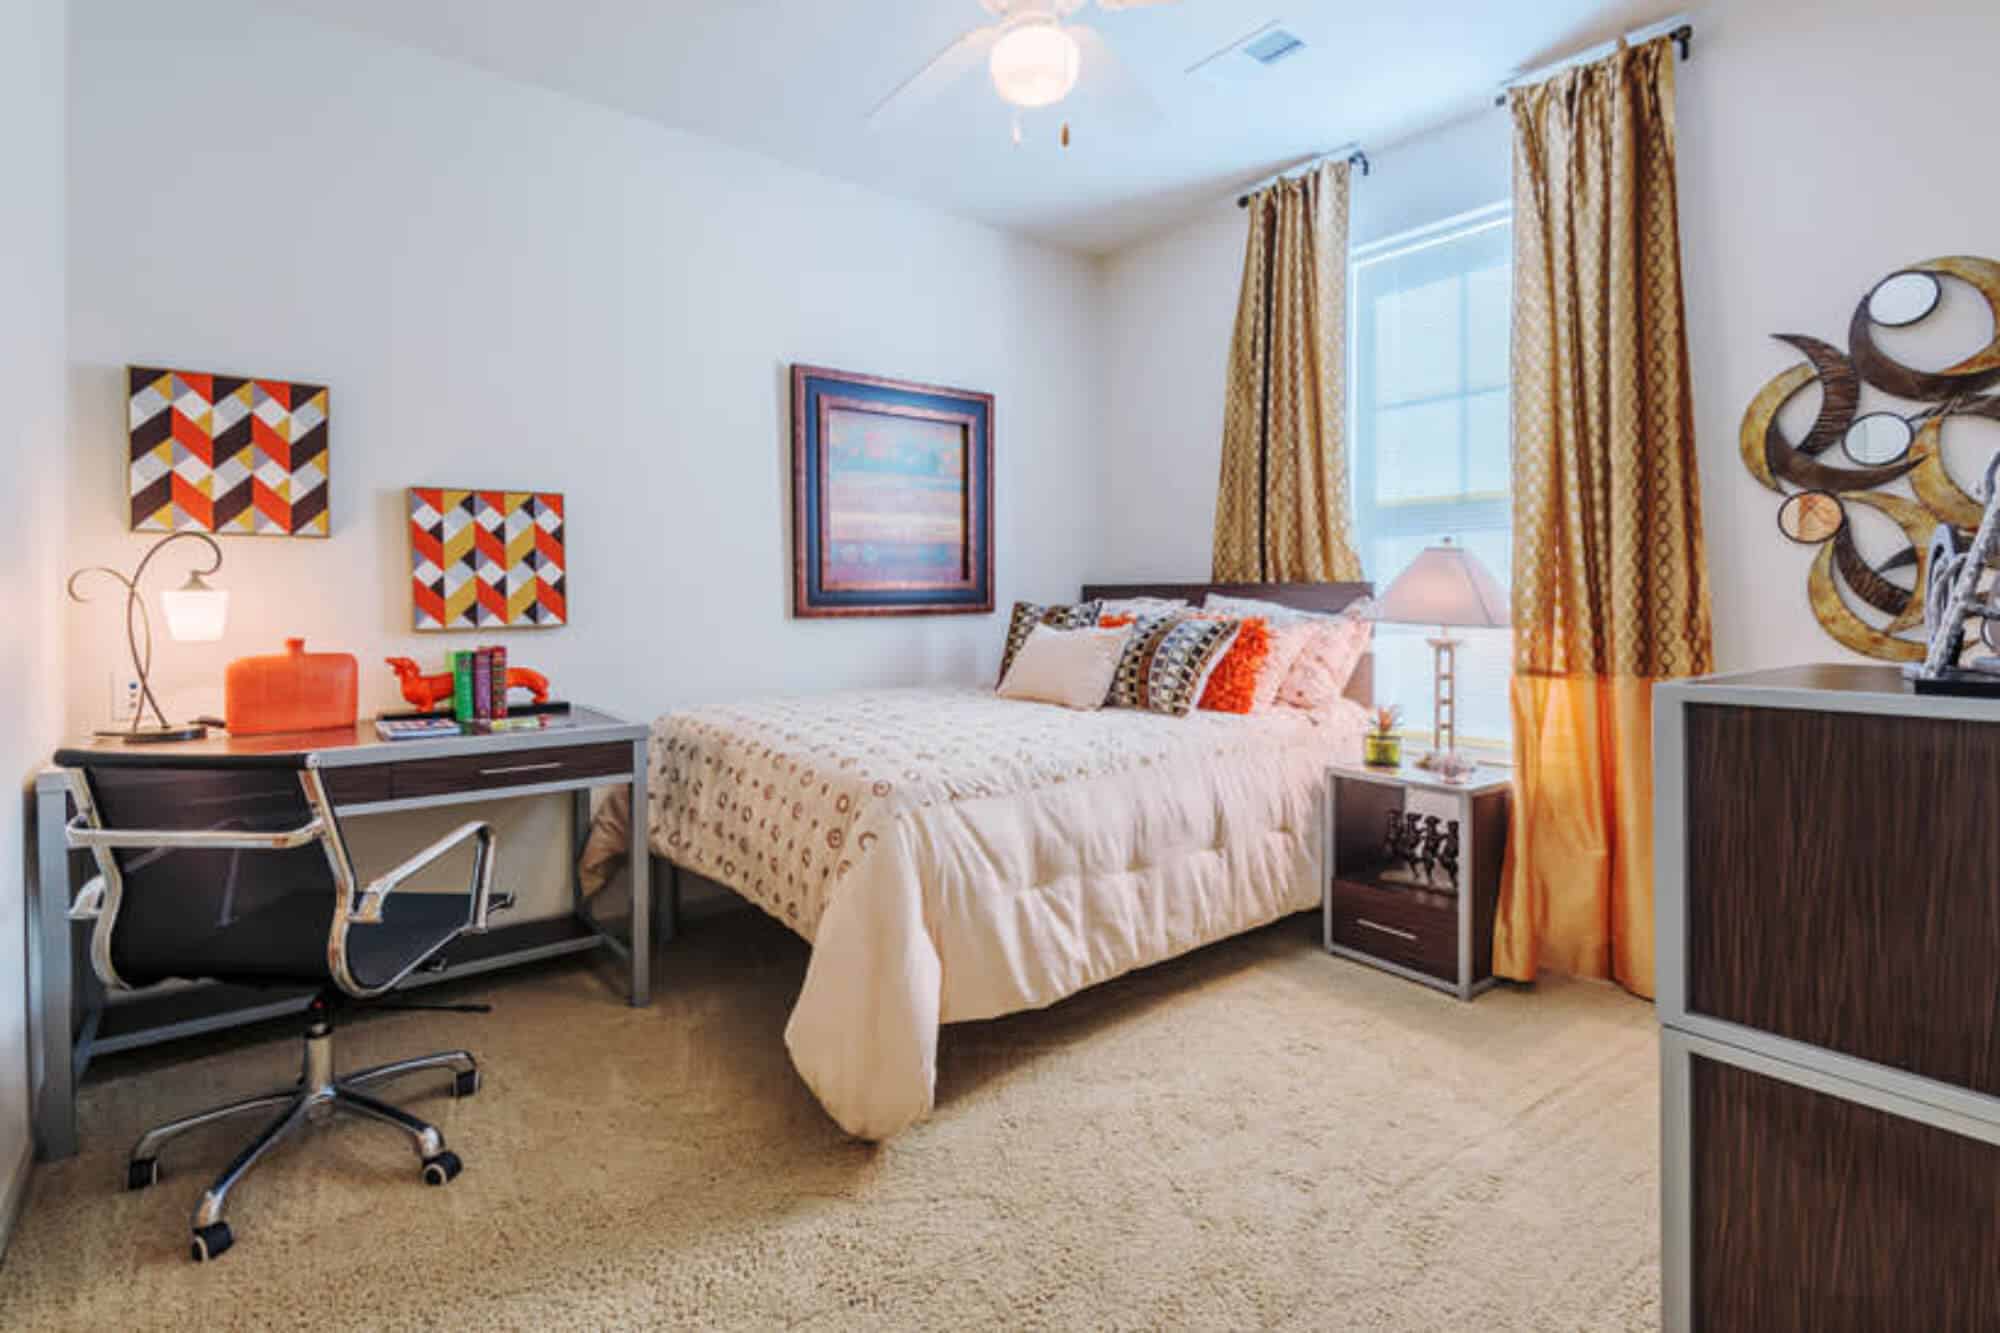 millenium one off campus apartments near the university of north carolina charlotte unc charlotte uncc fully furnished private bedrooms with queen sized beds